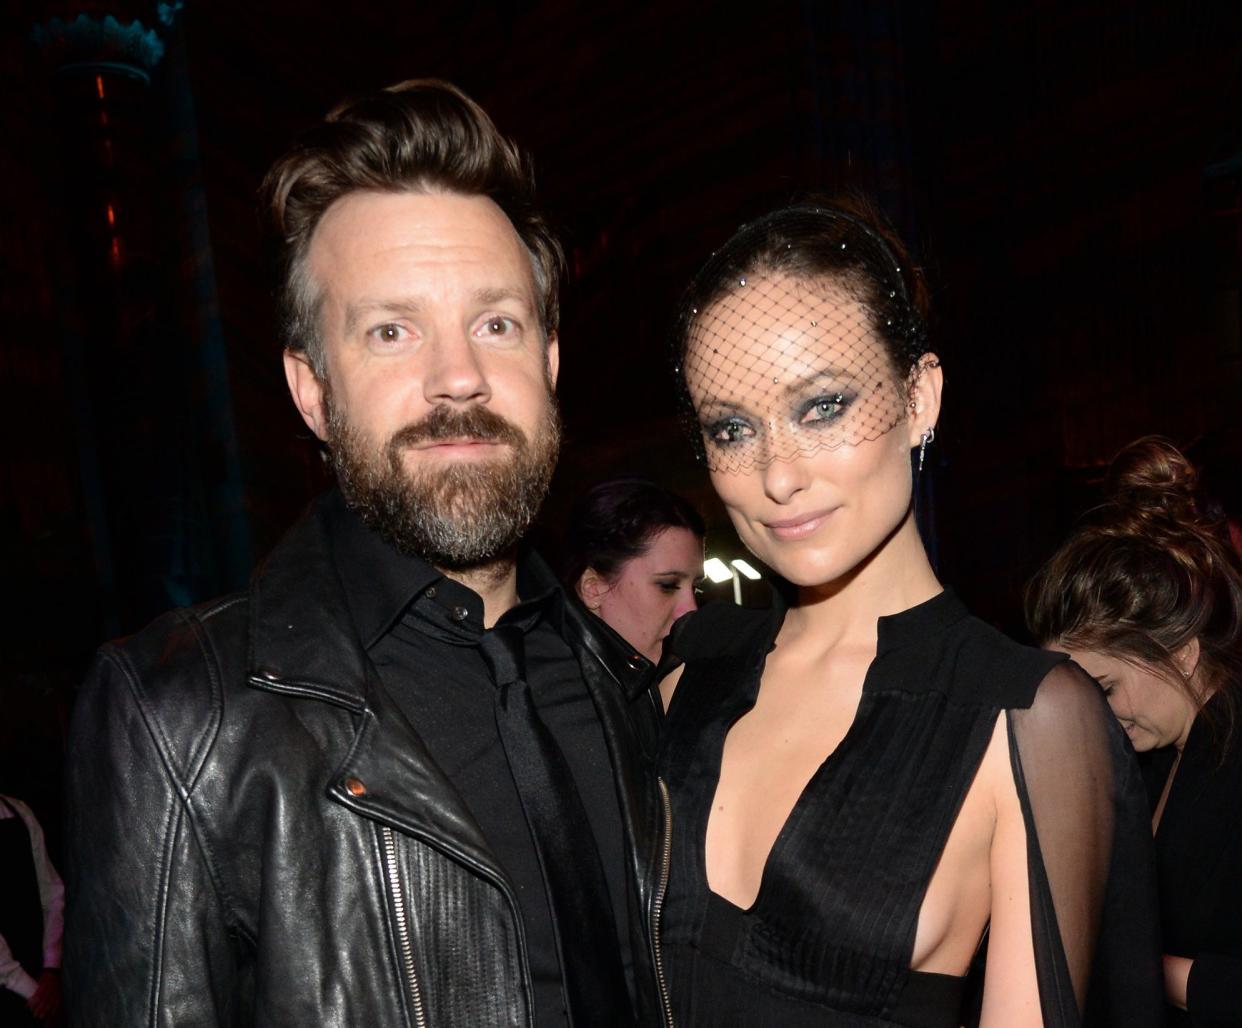 Jason Sudeikis and Olivia Wilde attend the after party of the New York premiere of 'Vinyl' at Ziegfeld Theatre on January 15, 2016 in New York City. (Photo: )